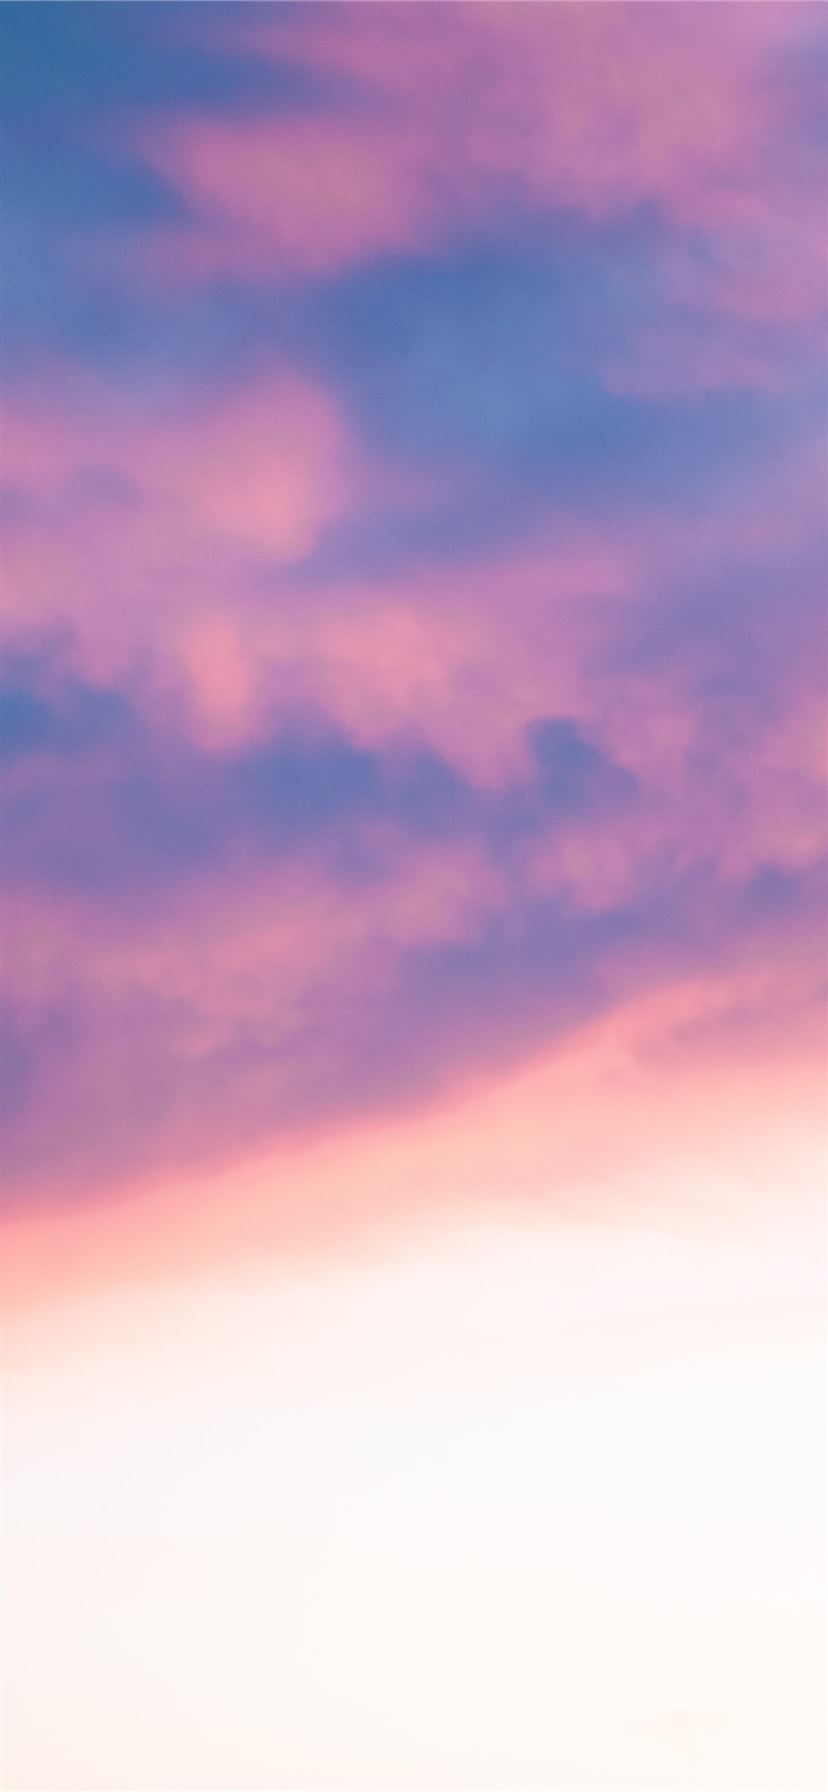 Cloudy Sky Stock Photos Images and Backgrounds for Free Download